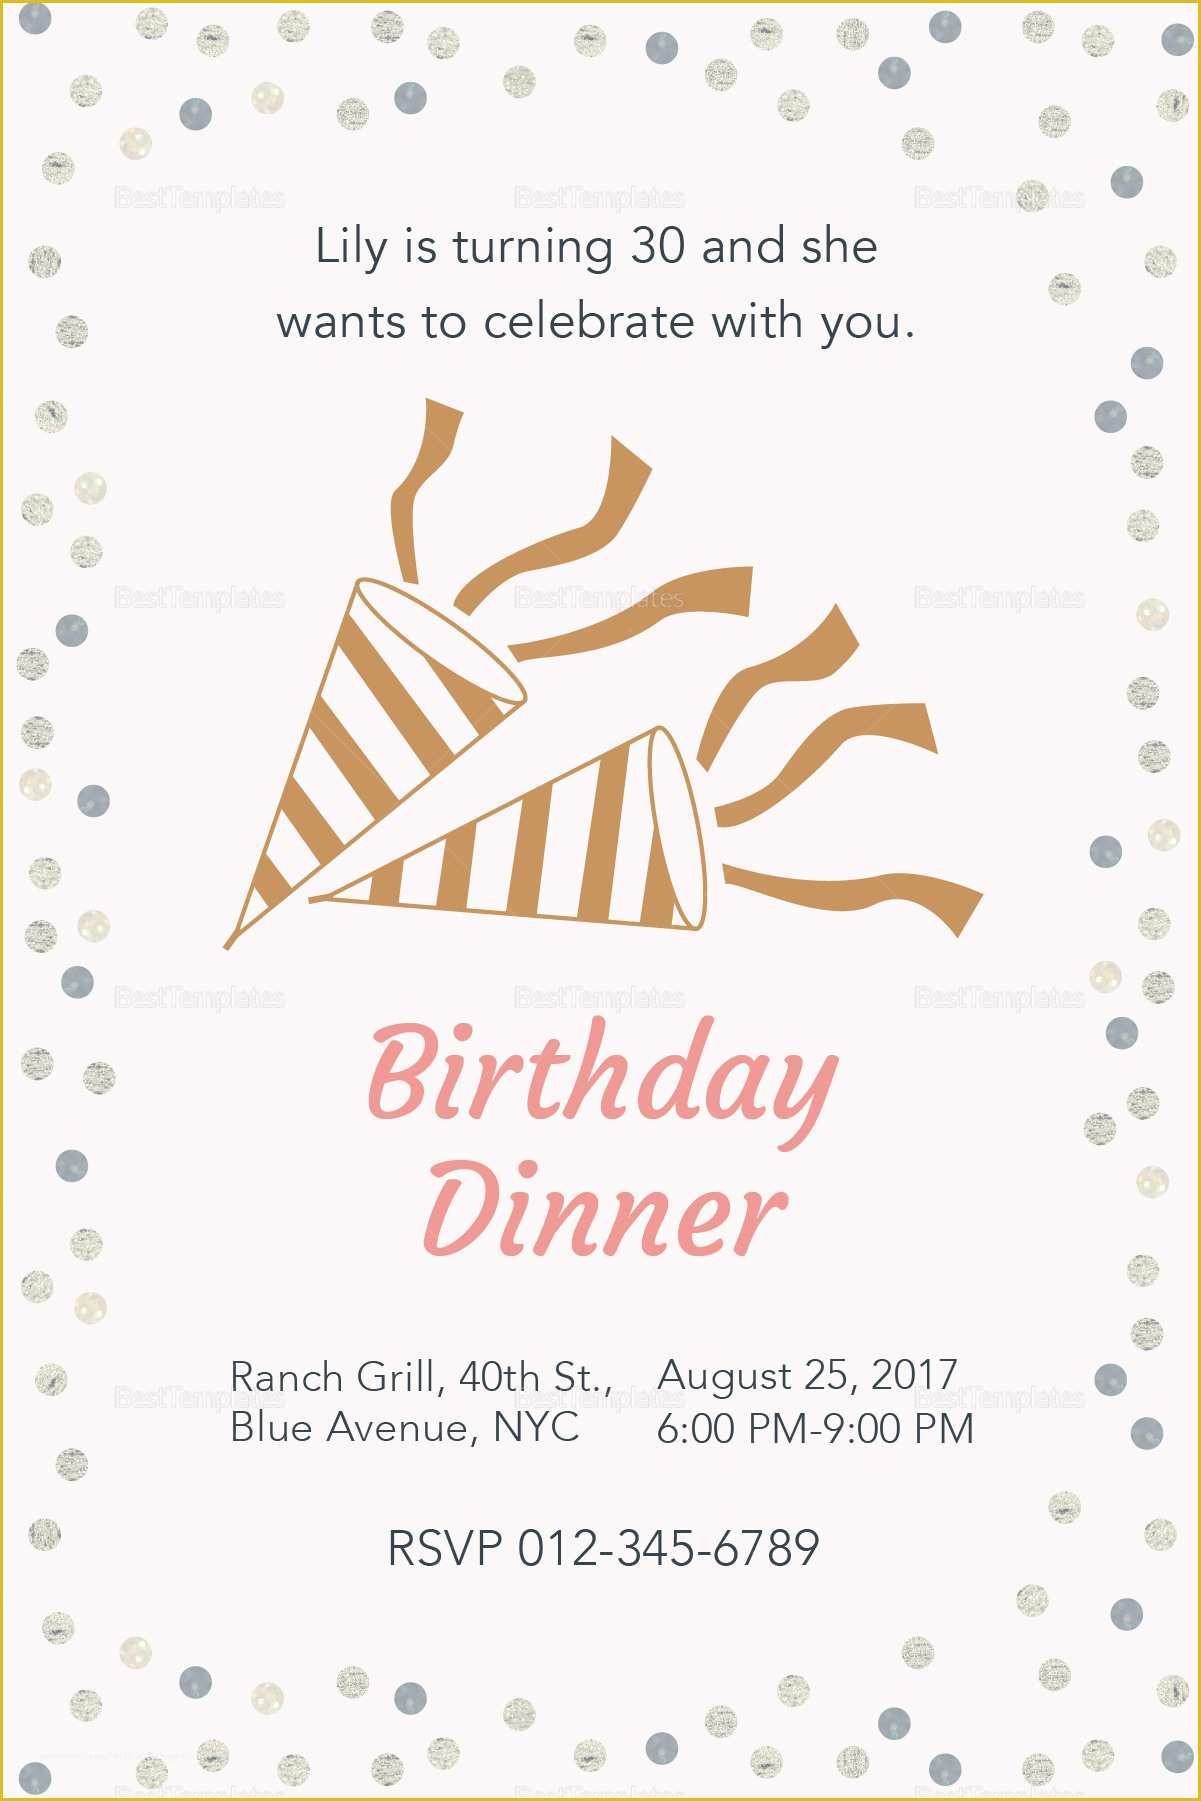 Dinner Party Invitation Templates Free Download Of Birthday Dinner Invitation Design Template In Psd Word